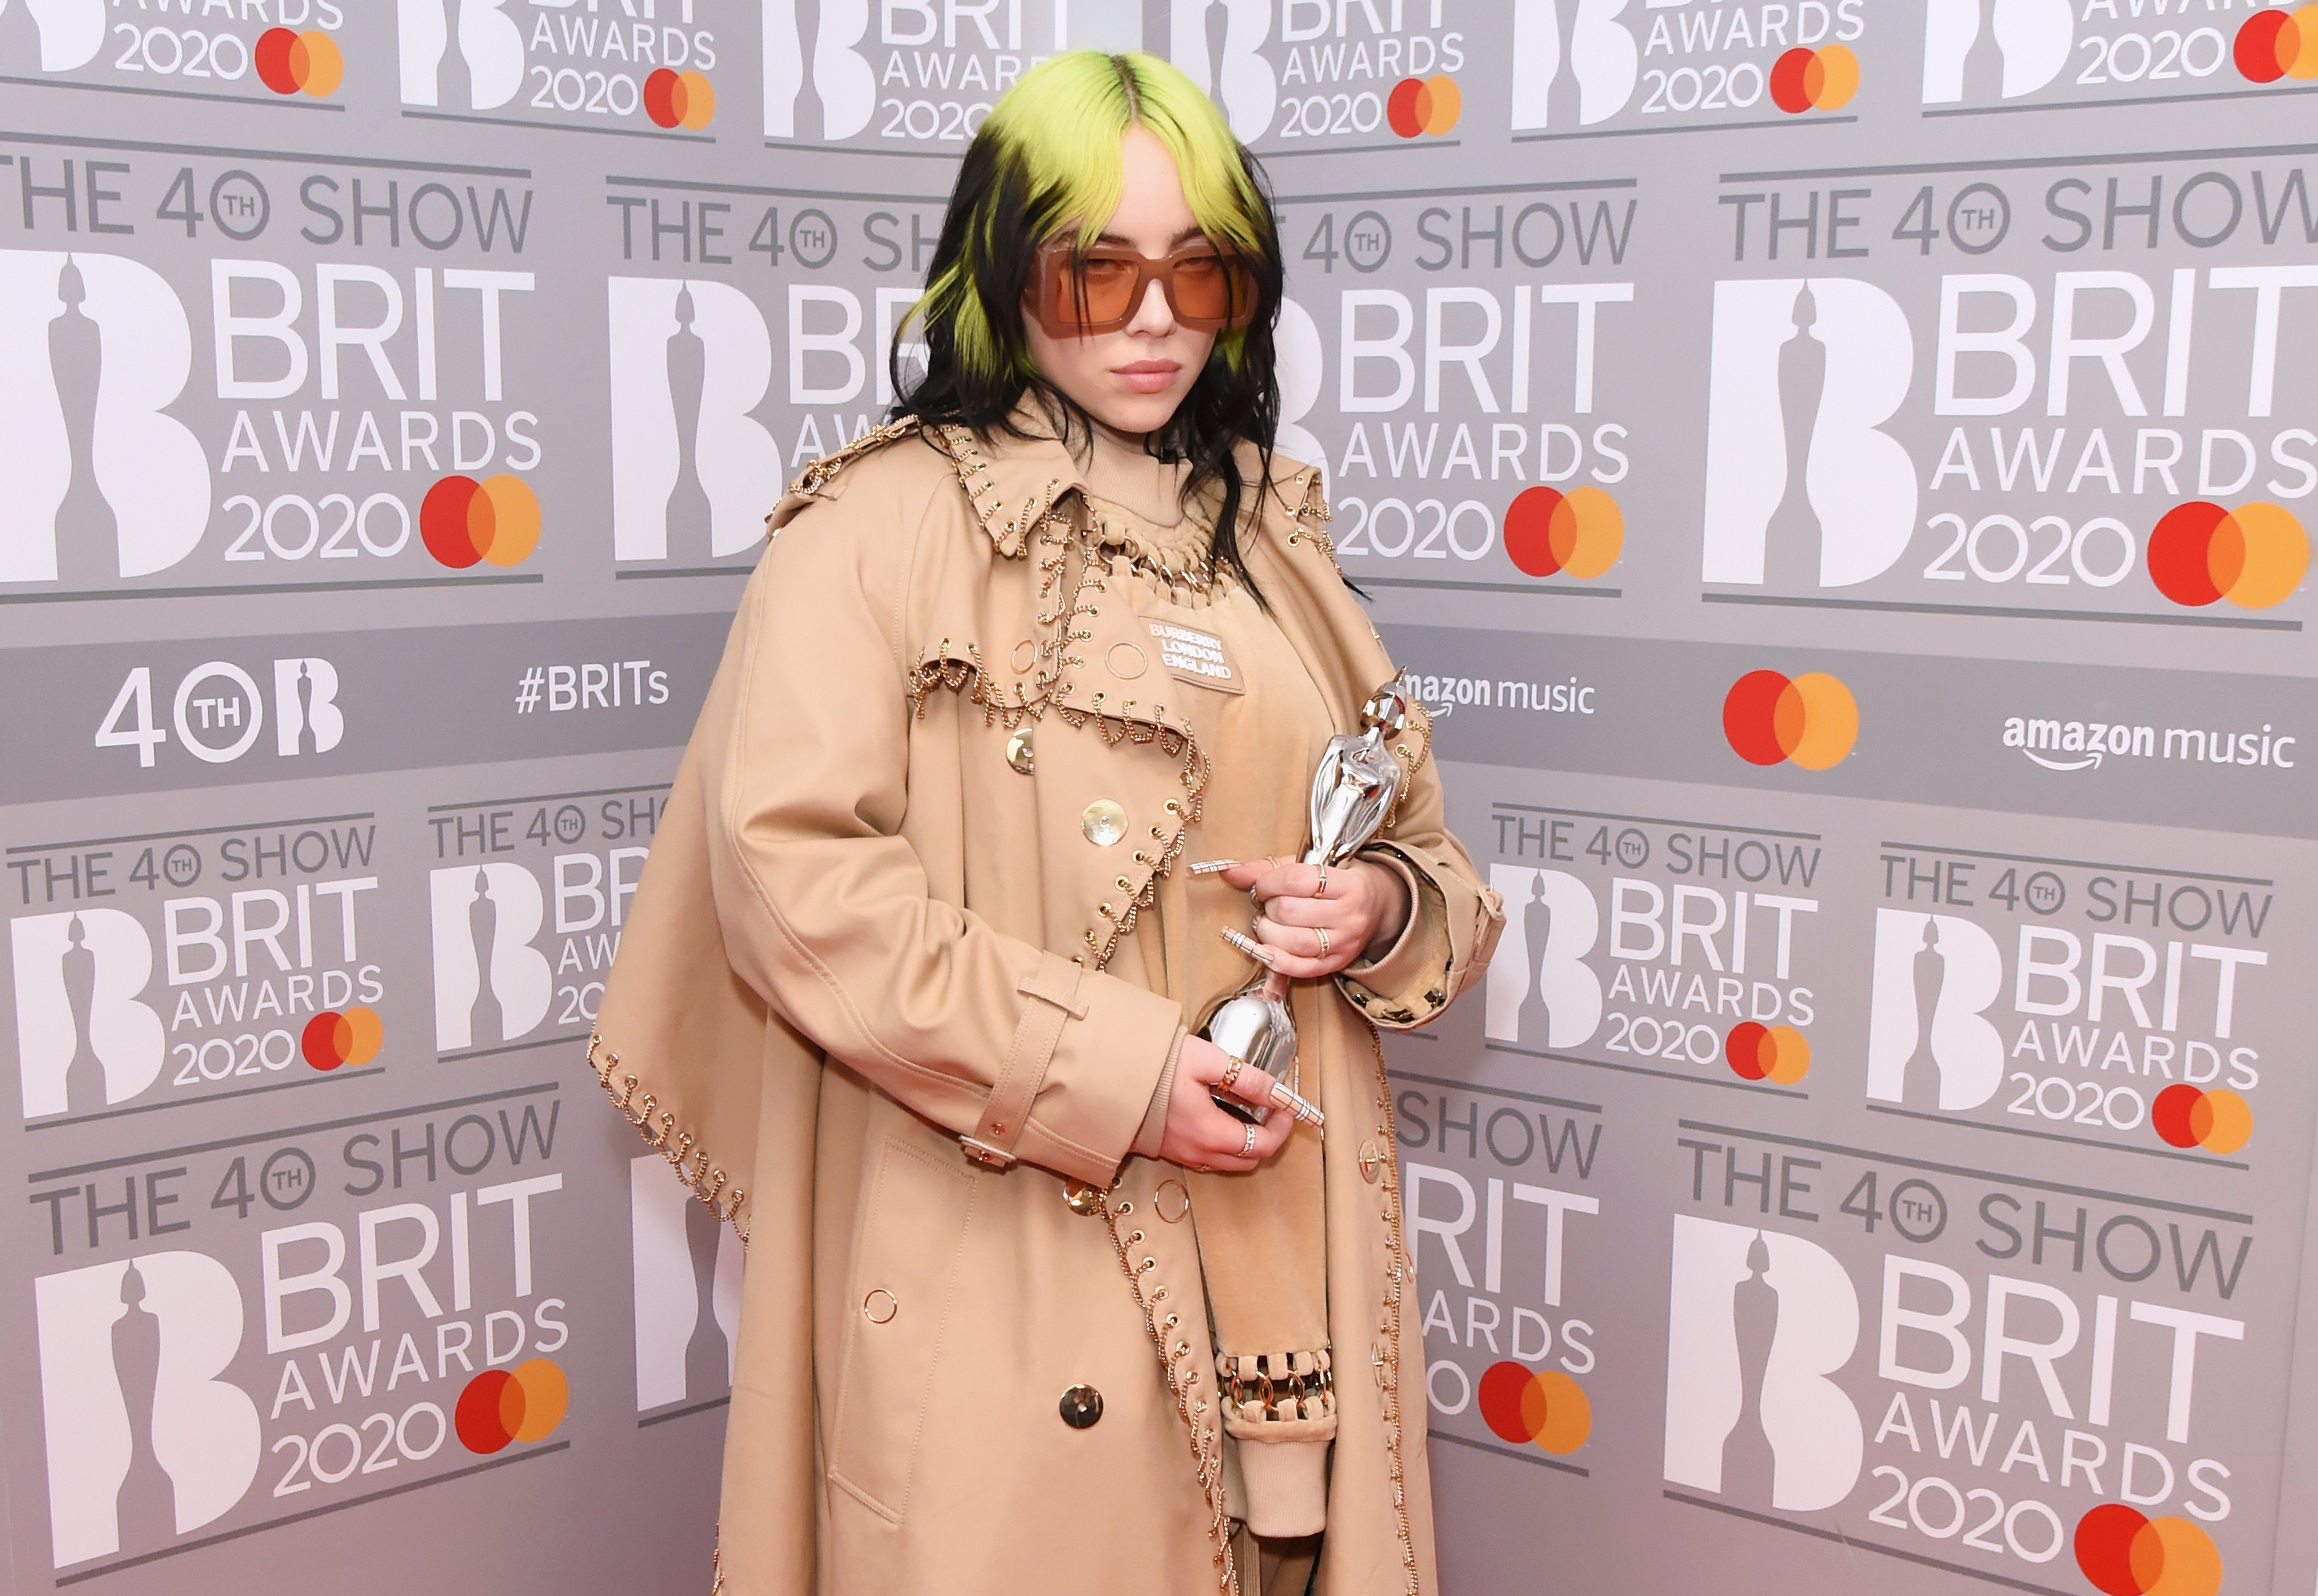 Billie Eilish, winner of the Best International Female Solo Artist award, poses in the winners room at The BRIT Awards 2020 at The O2 Arena on February 18, 2020 in London, England.